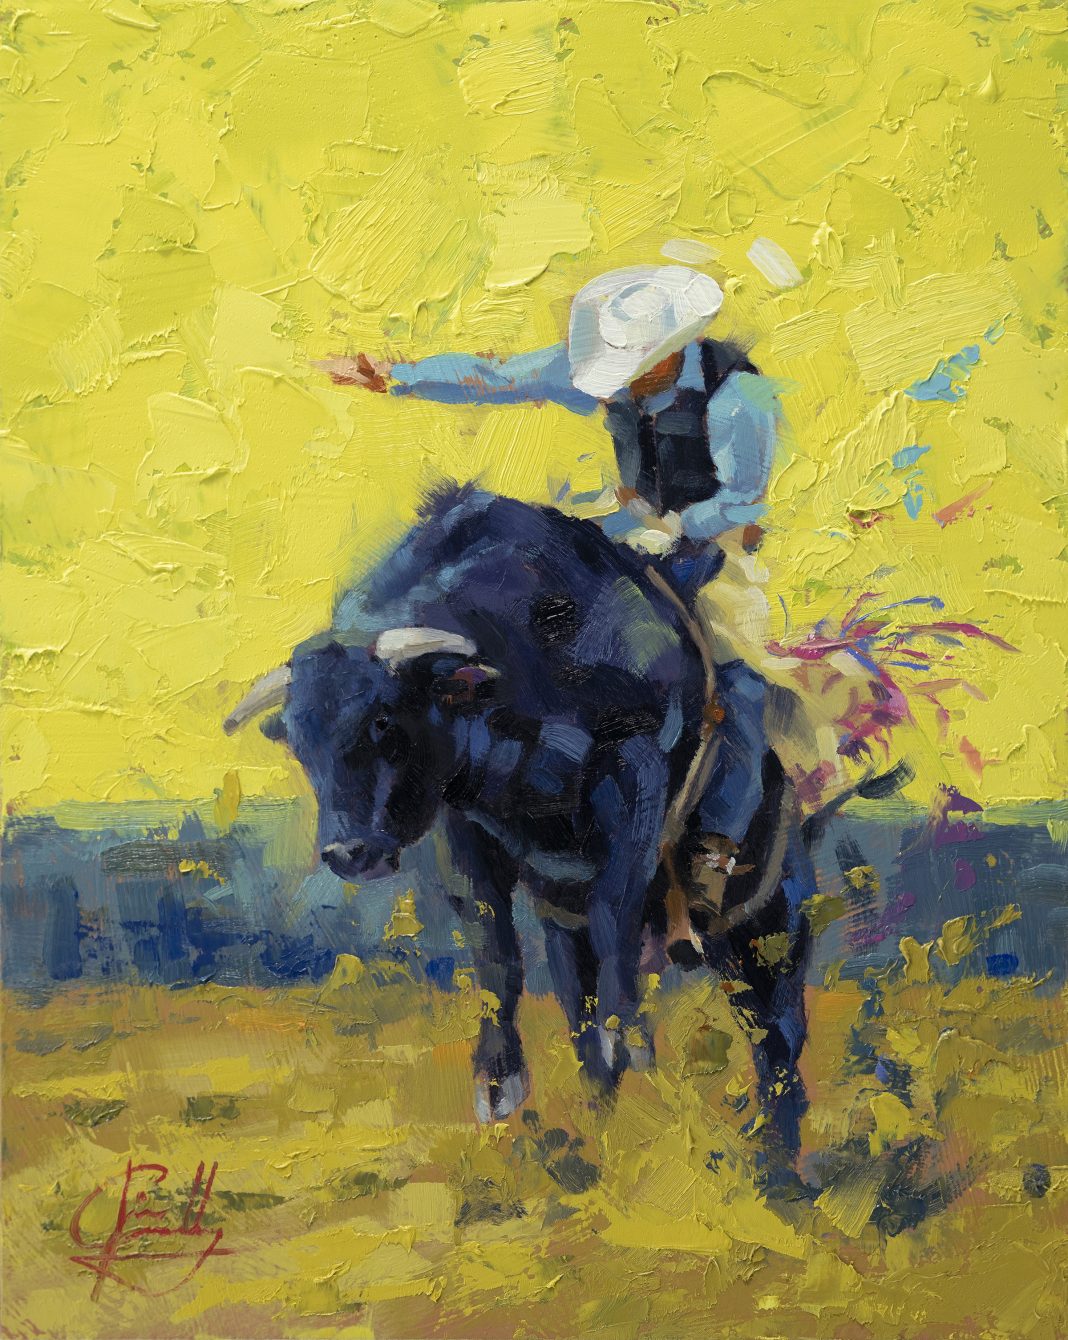 Jim Connelly Mr. Sunshine cowboy bucking bull rider western oil painting